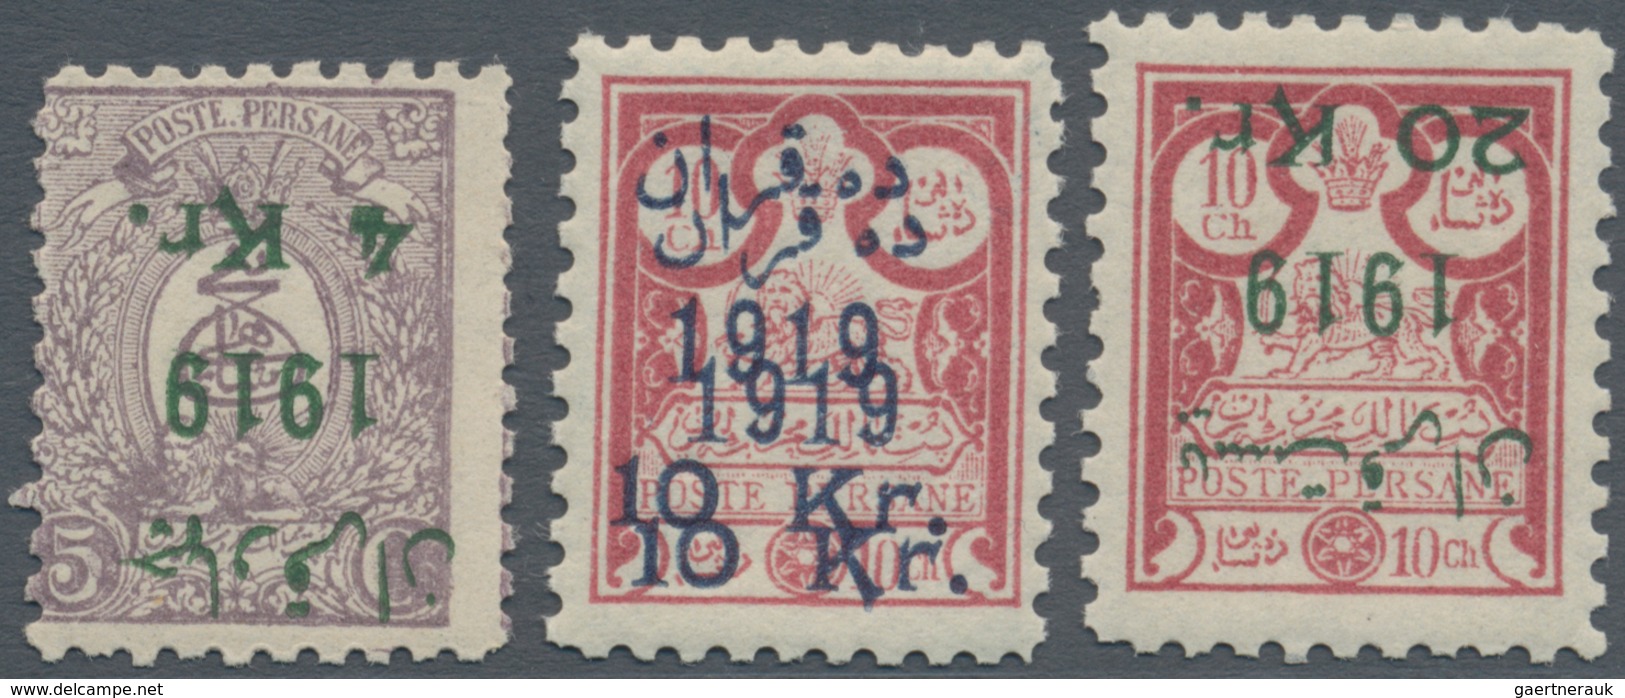 Iran: 1919, Three "1919" Overprinted Values Showing 4 Kr. And 20 Kr. Inverted Overprint, 10 Kr. Doub - Iran